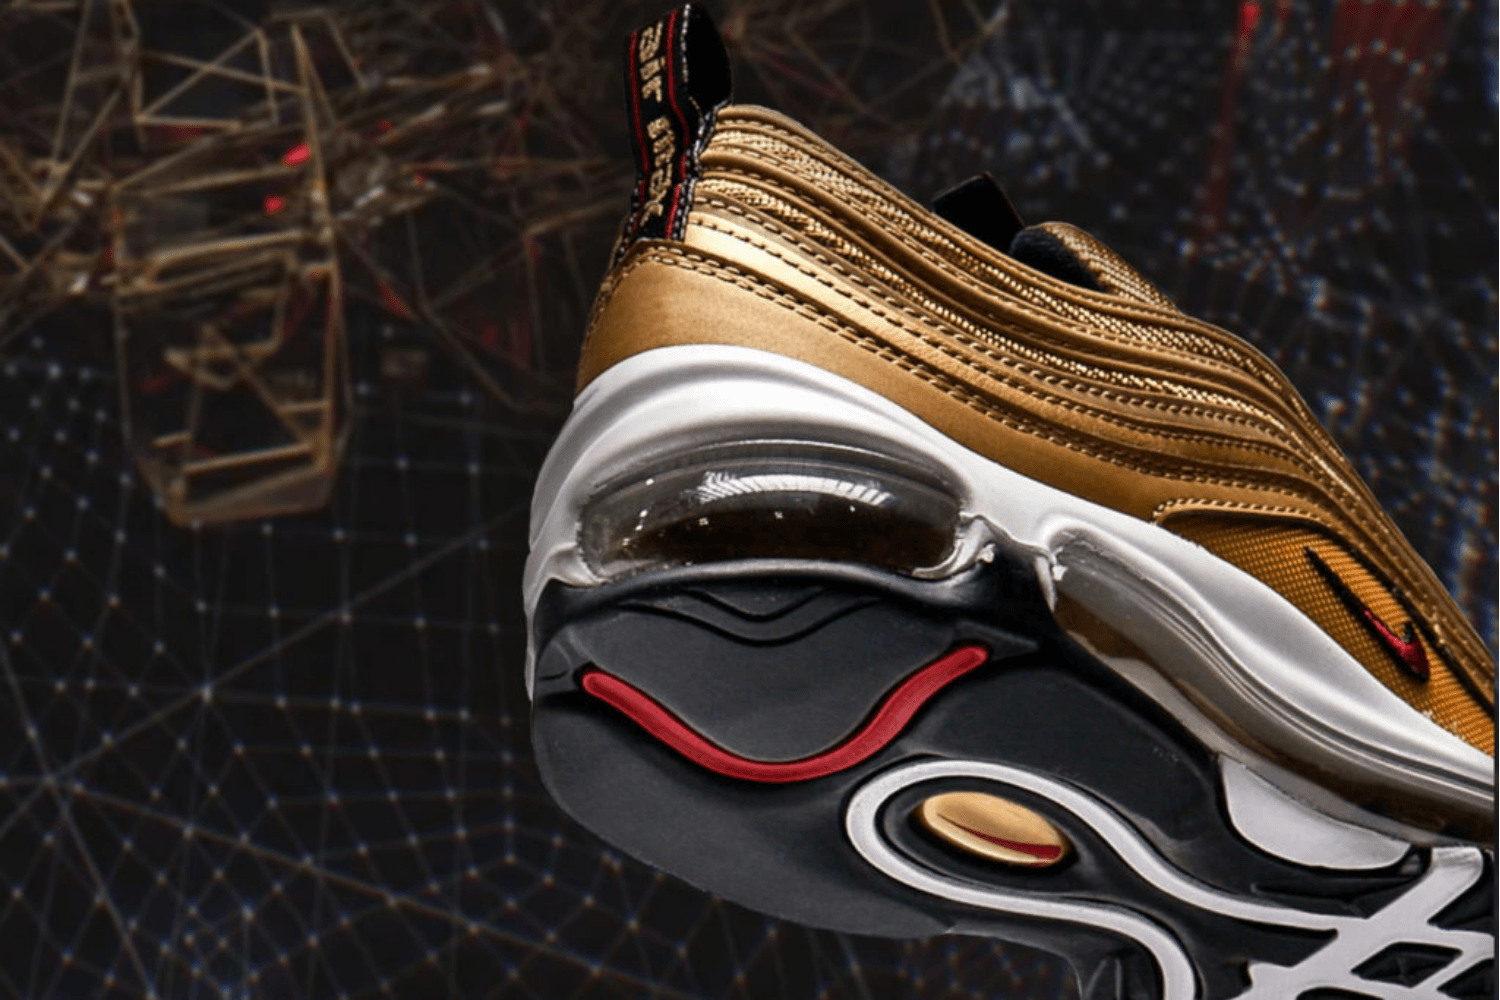 Get 23% off the Nike Air Max 'Gold Bullet' 97 at AFEW